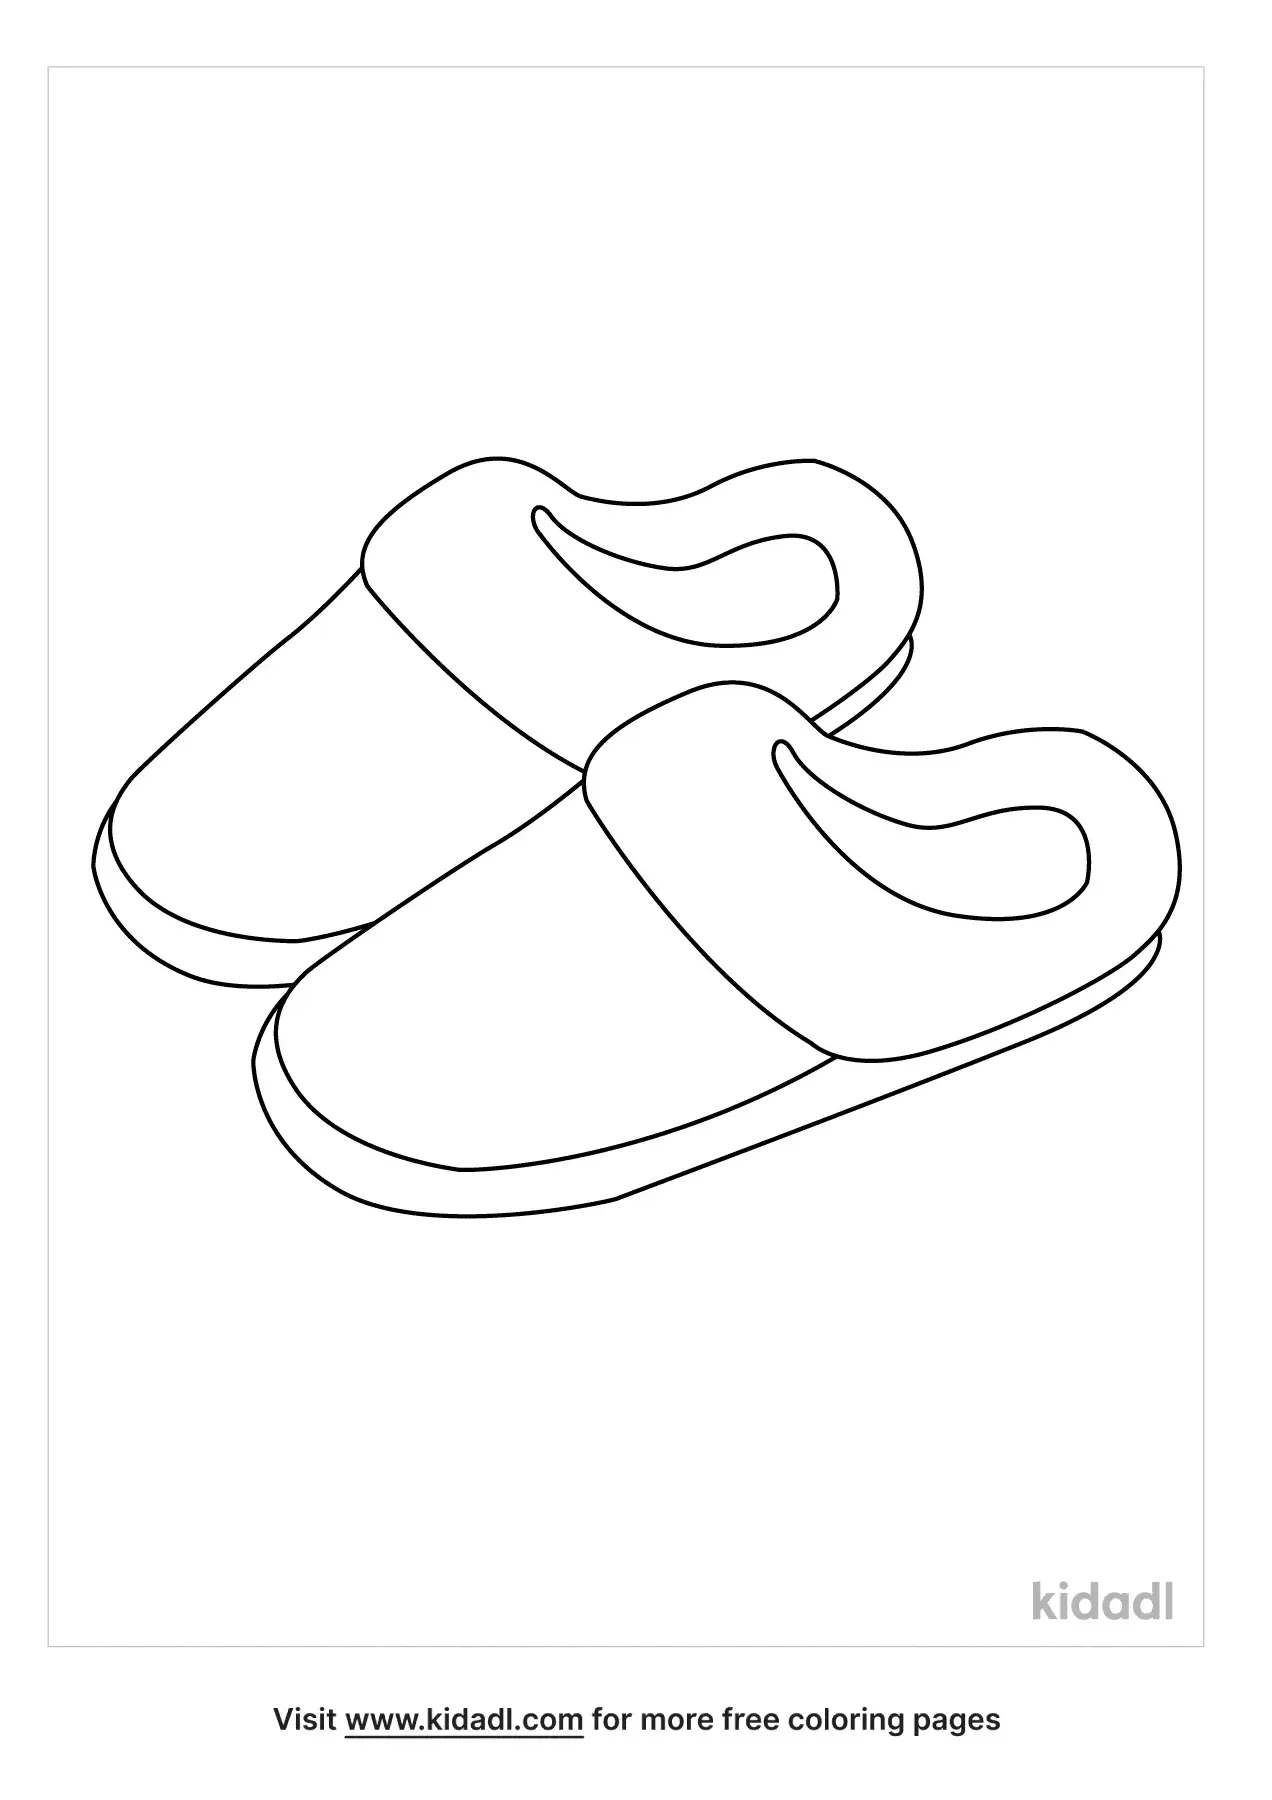 Free Slippers Coloring Page | Coloring Page Printables | Kidadl